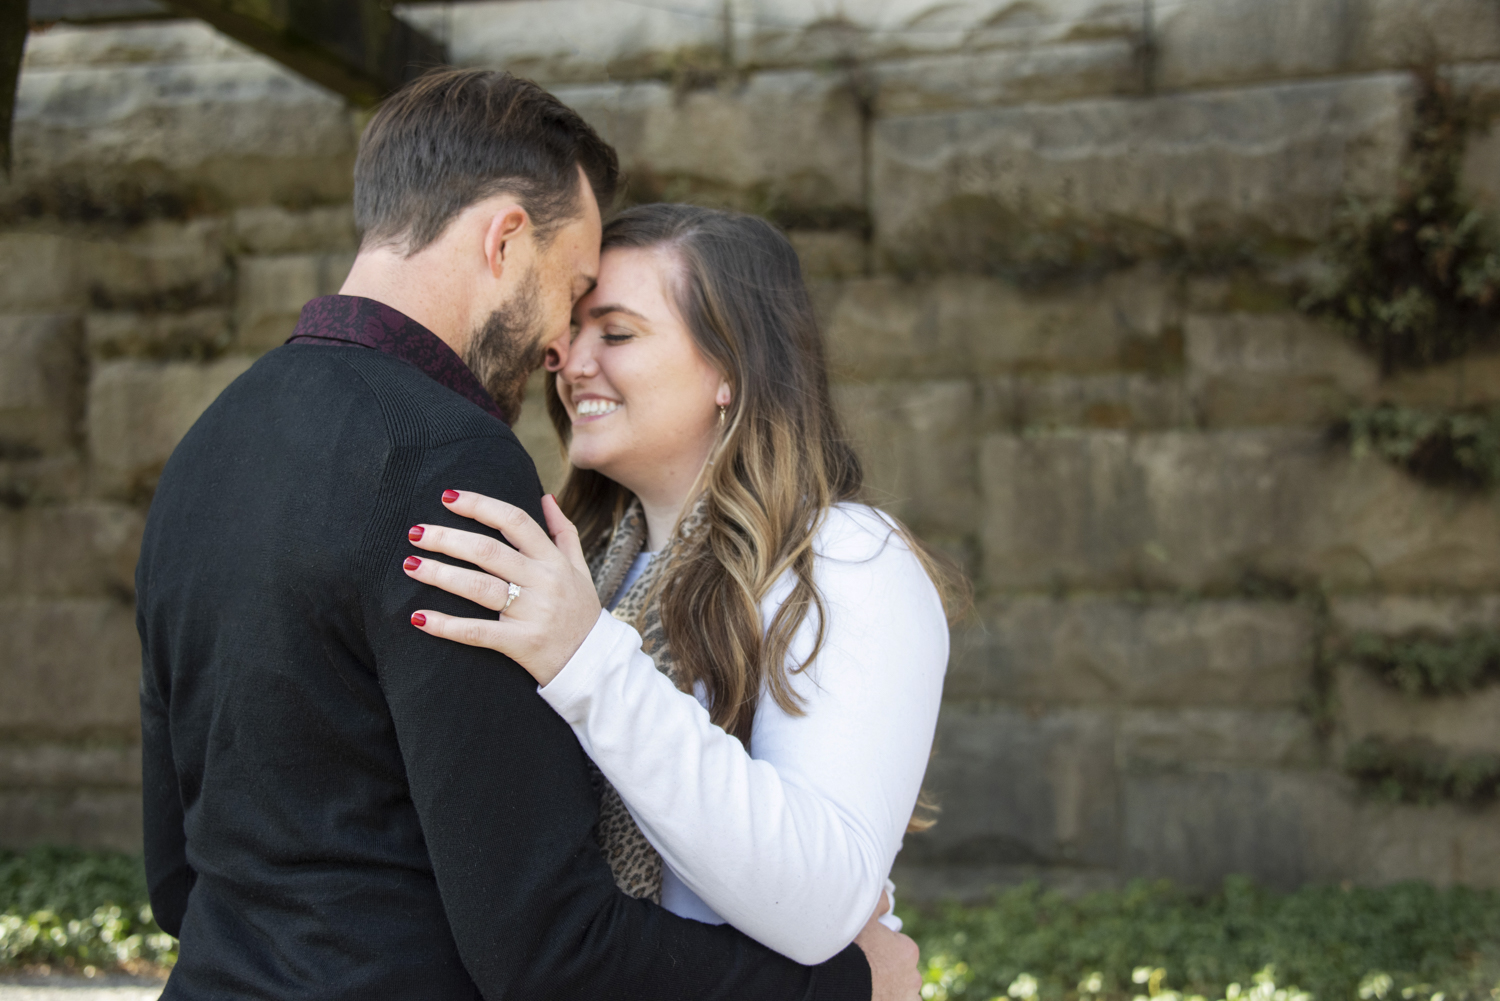 Man and woman touching foreheads after proposal at Biltmore Estate in Asheville, NC